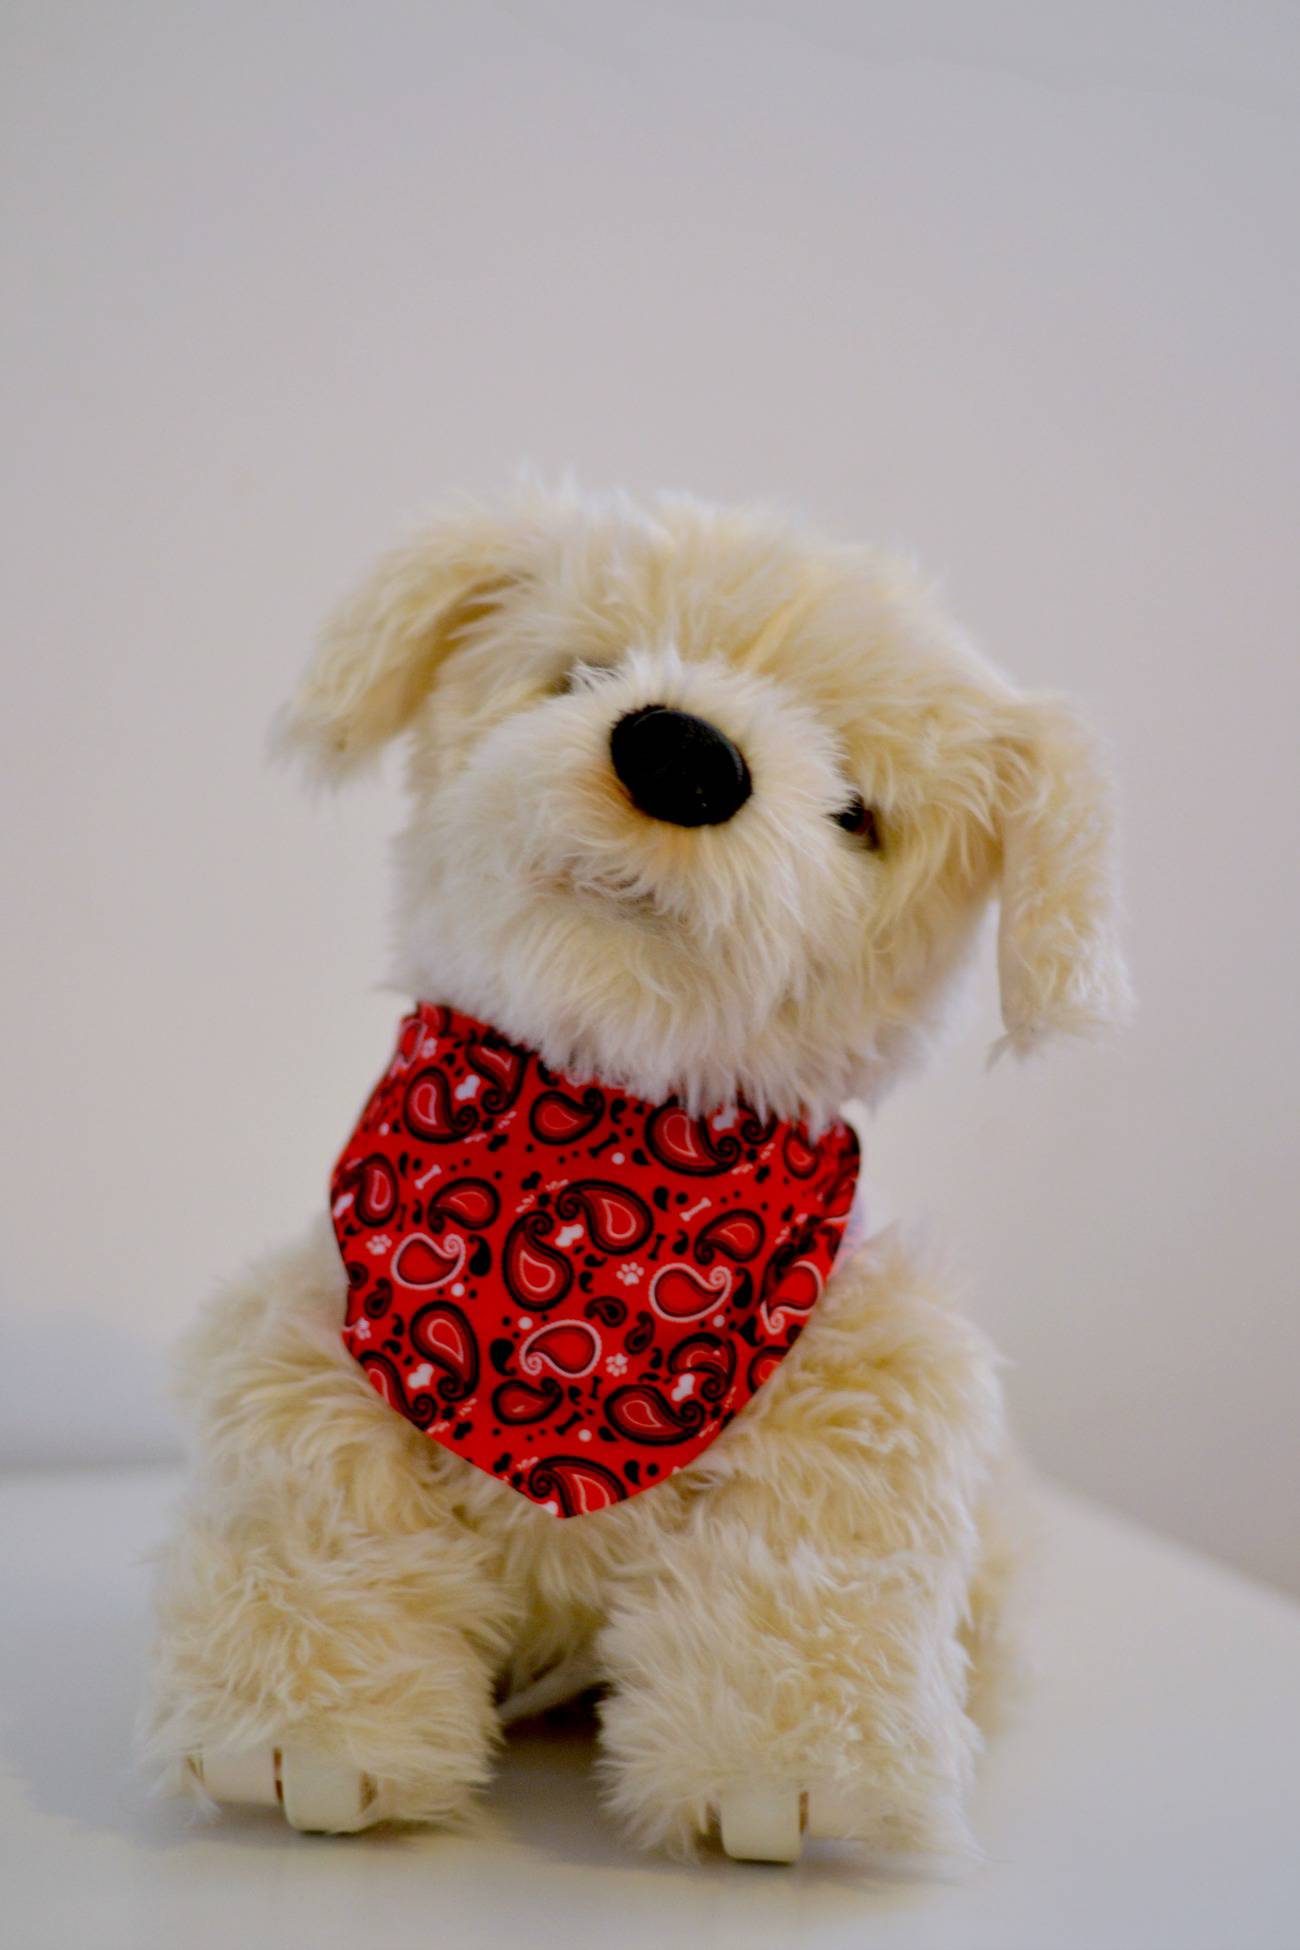 georgie the interactive puppy toy